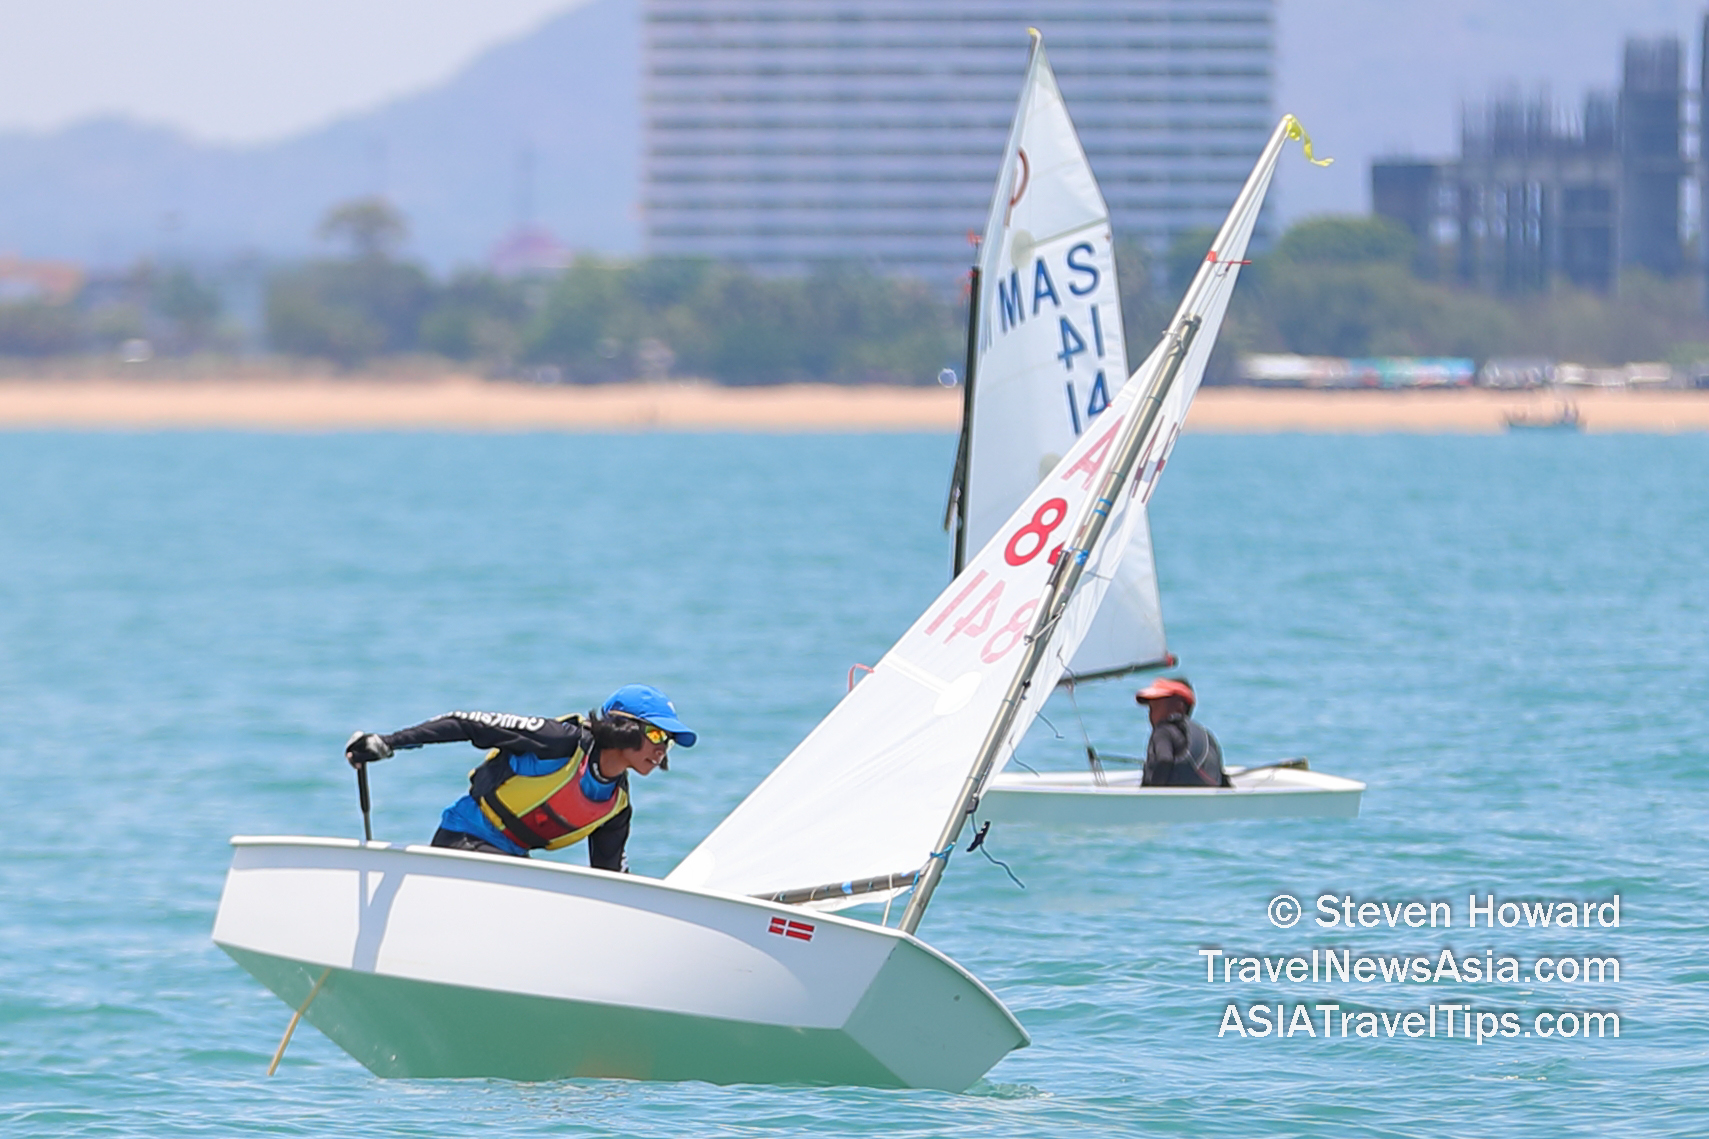 Action from Top of the Gulf Regatta 2019 in Pattaya, Thailand on Saturday. Picture by Steven Howard of TravelNewsAsia.com. Click to enlarge.